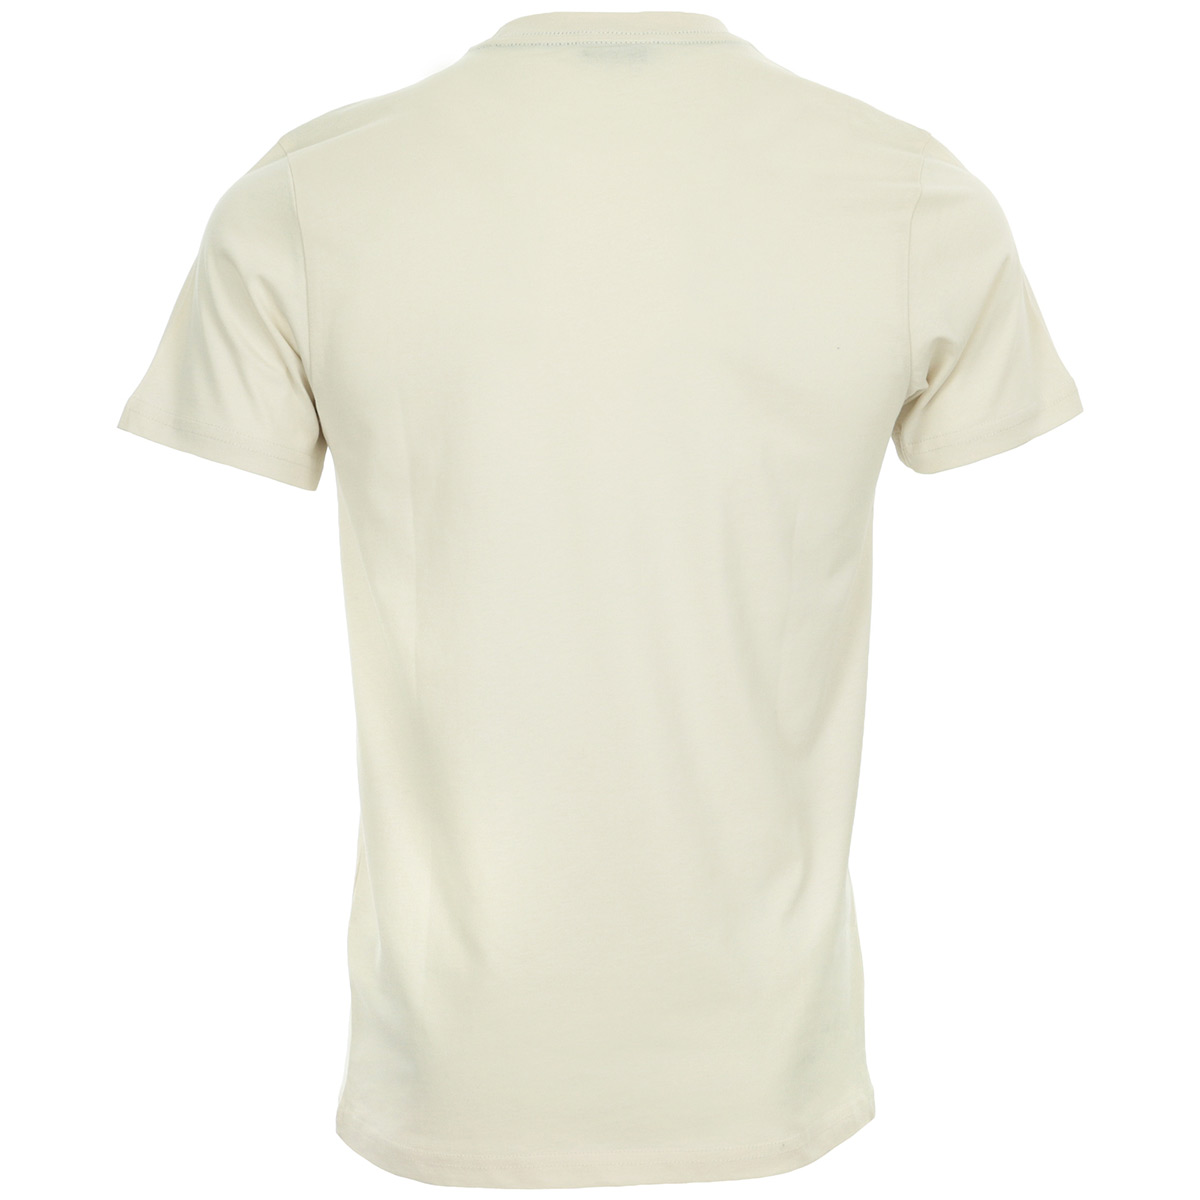 PS by Paul Smith Tee Shirt Slim Fit Modern